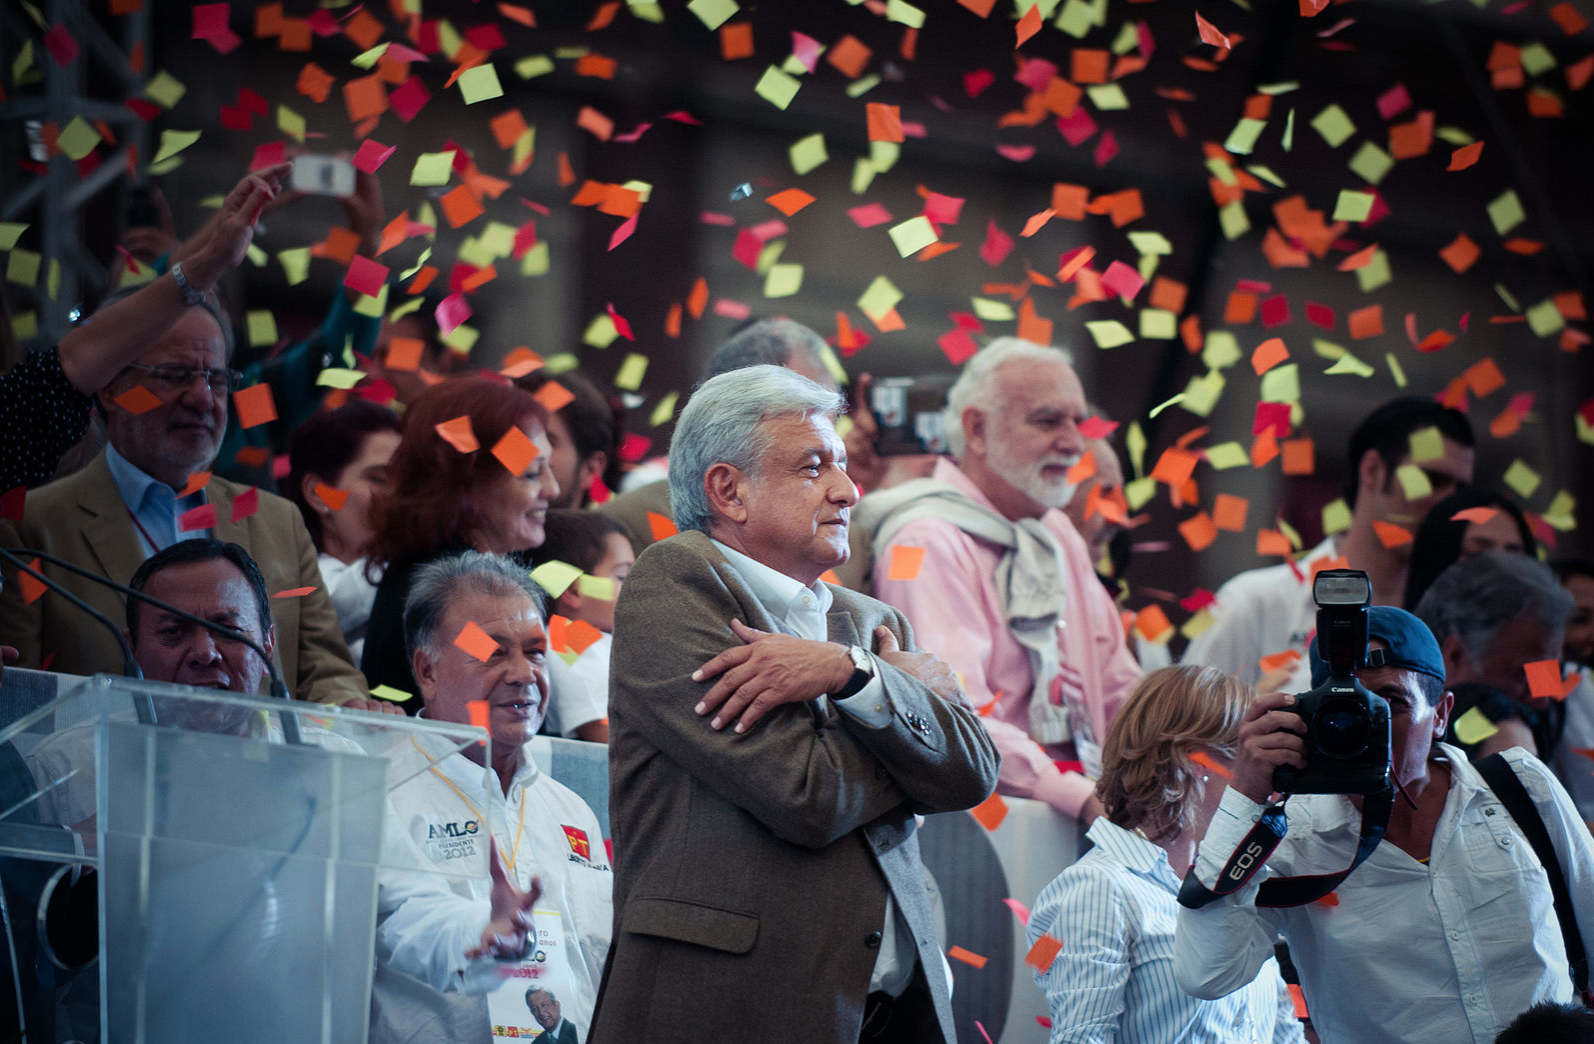 AMLO closing his 2012 campaign for President. Image credit: Wikicommons/ENEAS